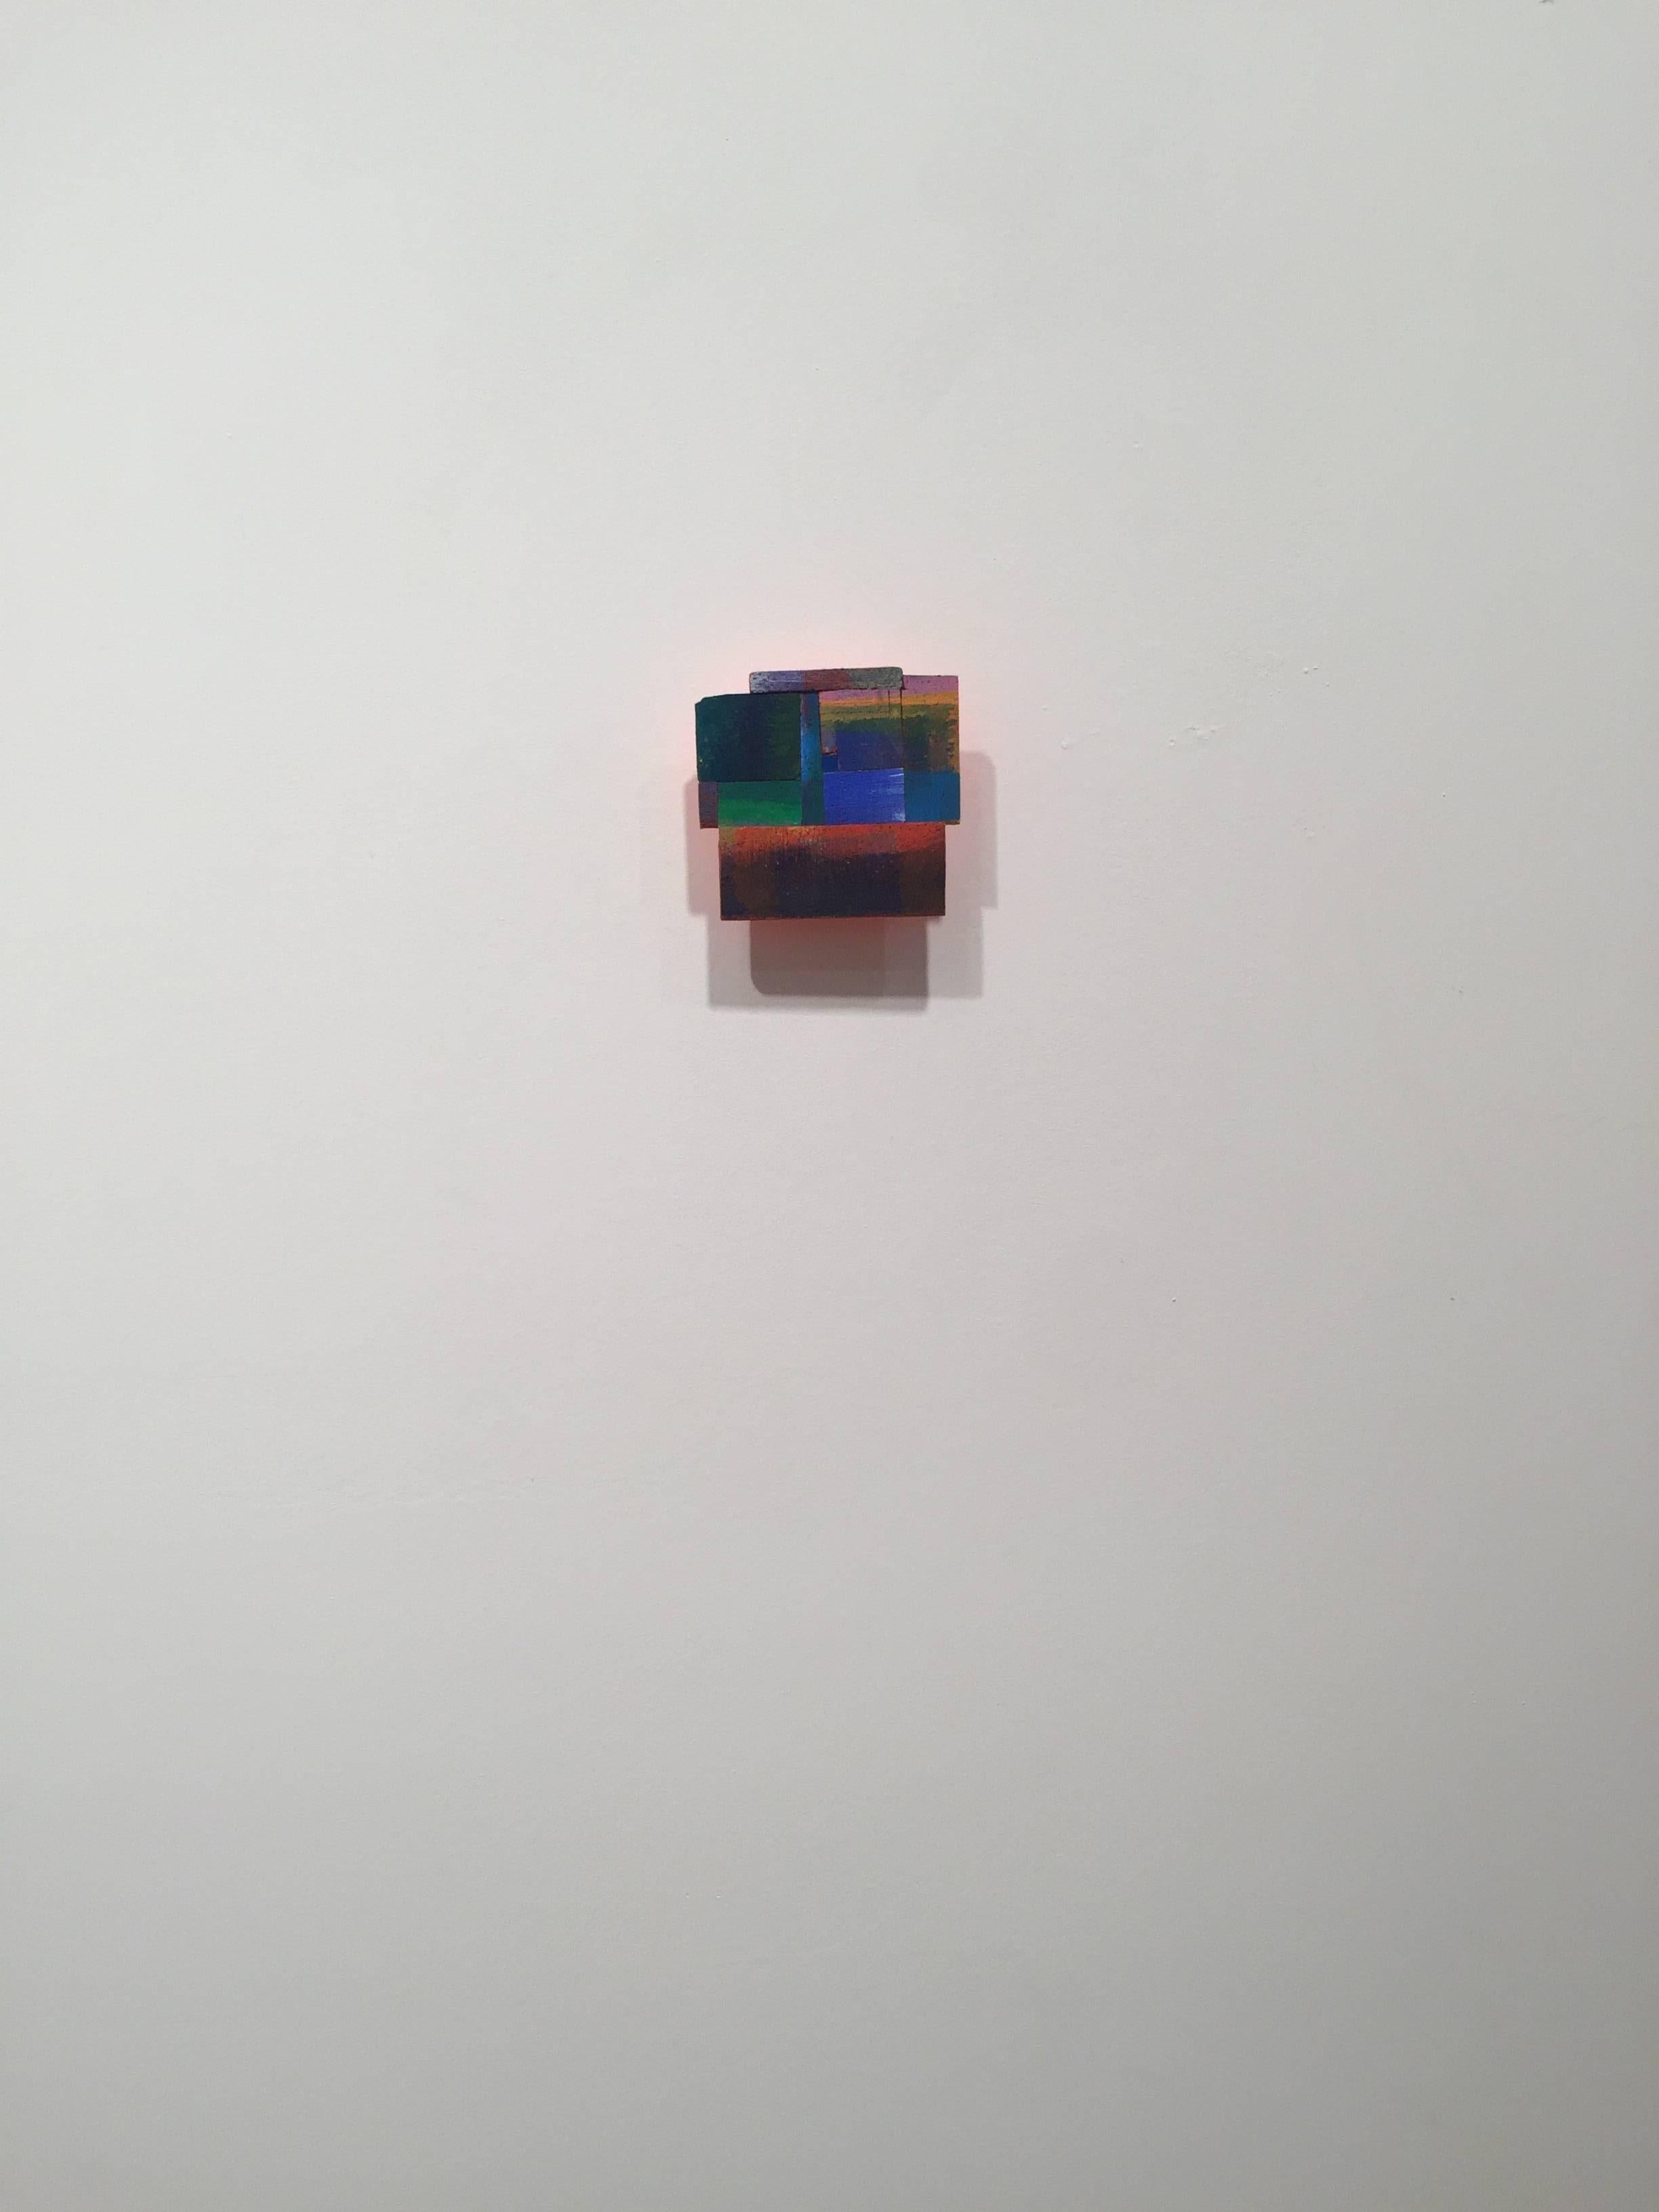 Joan Grubin creates dimensional installations, objects, and smaller wall works that revolve around a collaboration between the physical presence of pigment on paper and the visible but immaterial partners of reflected color, cast shadows, and